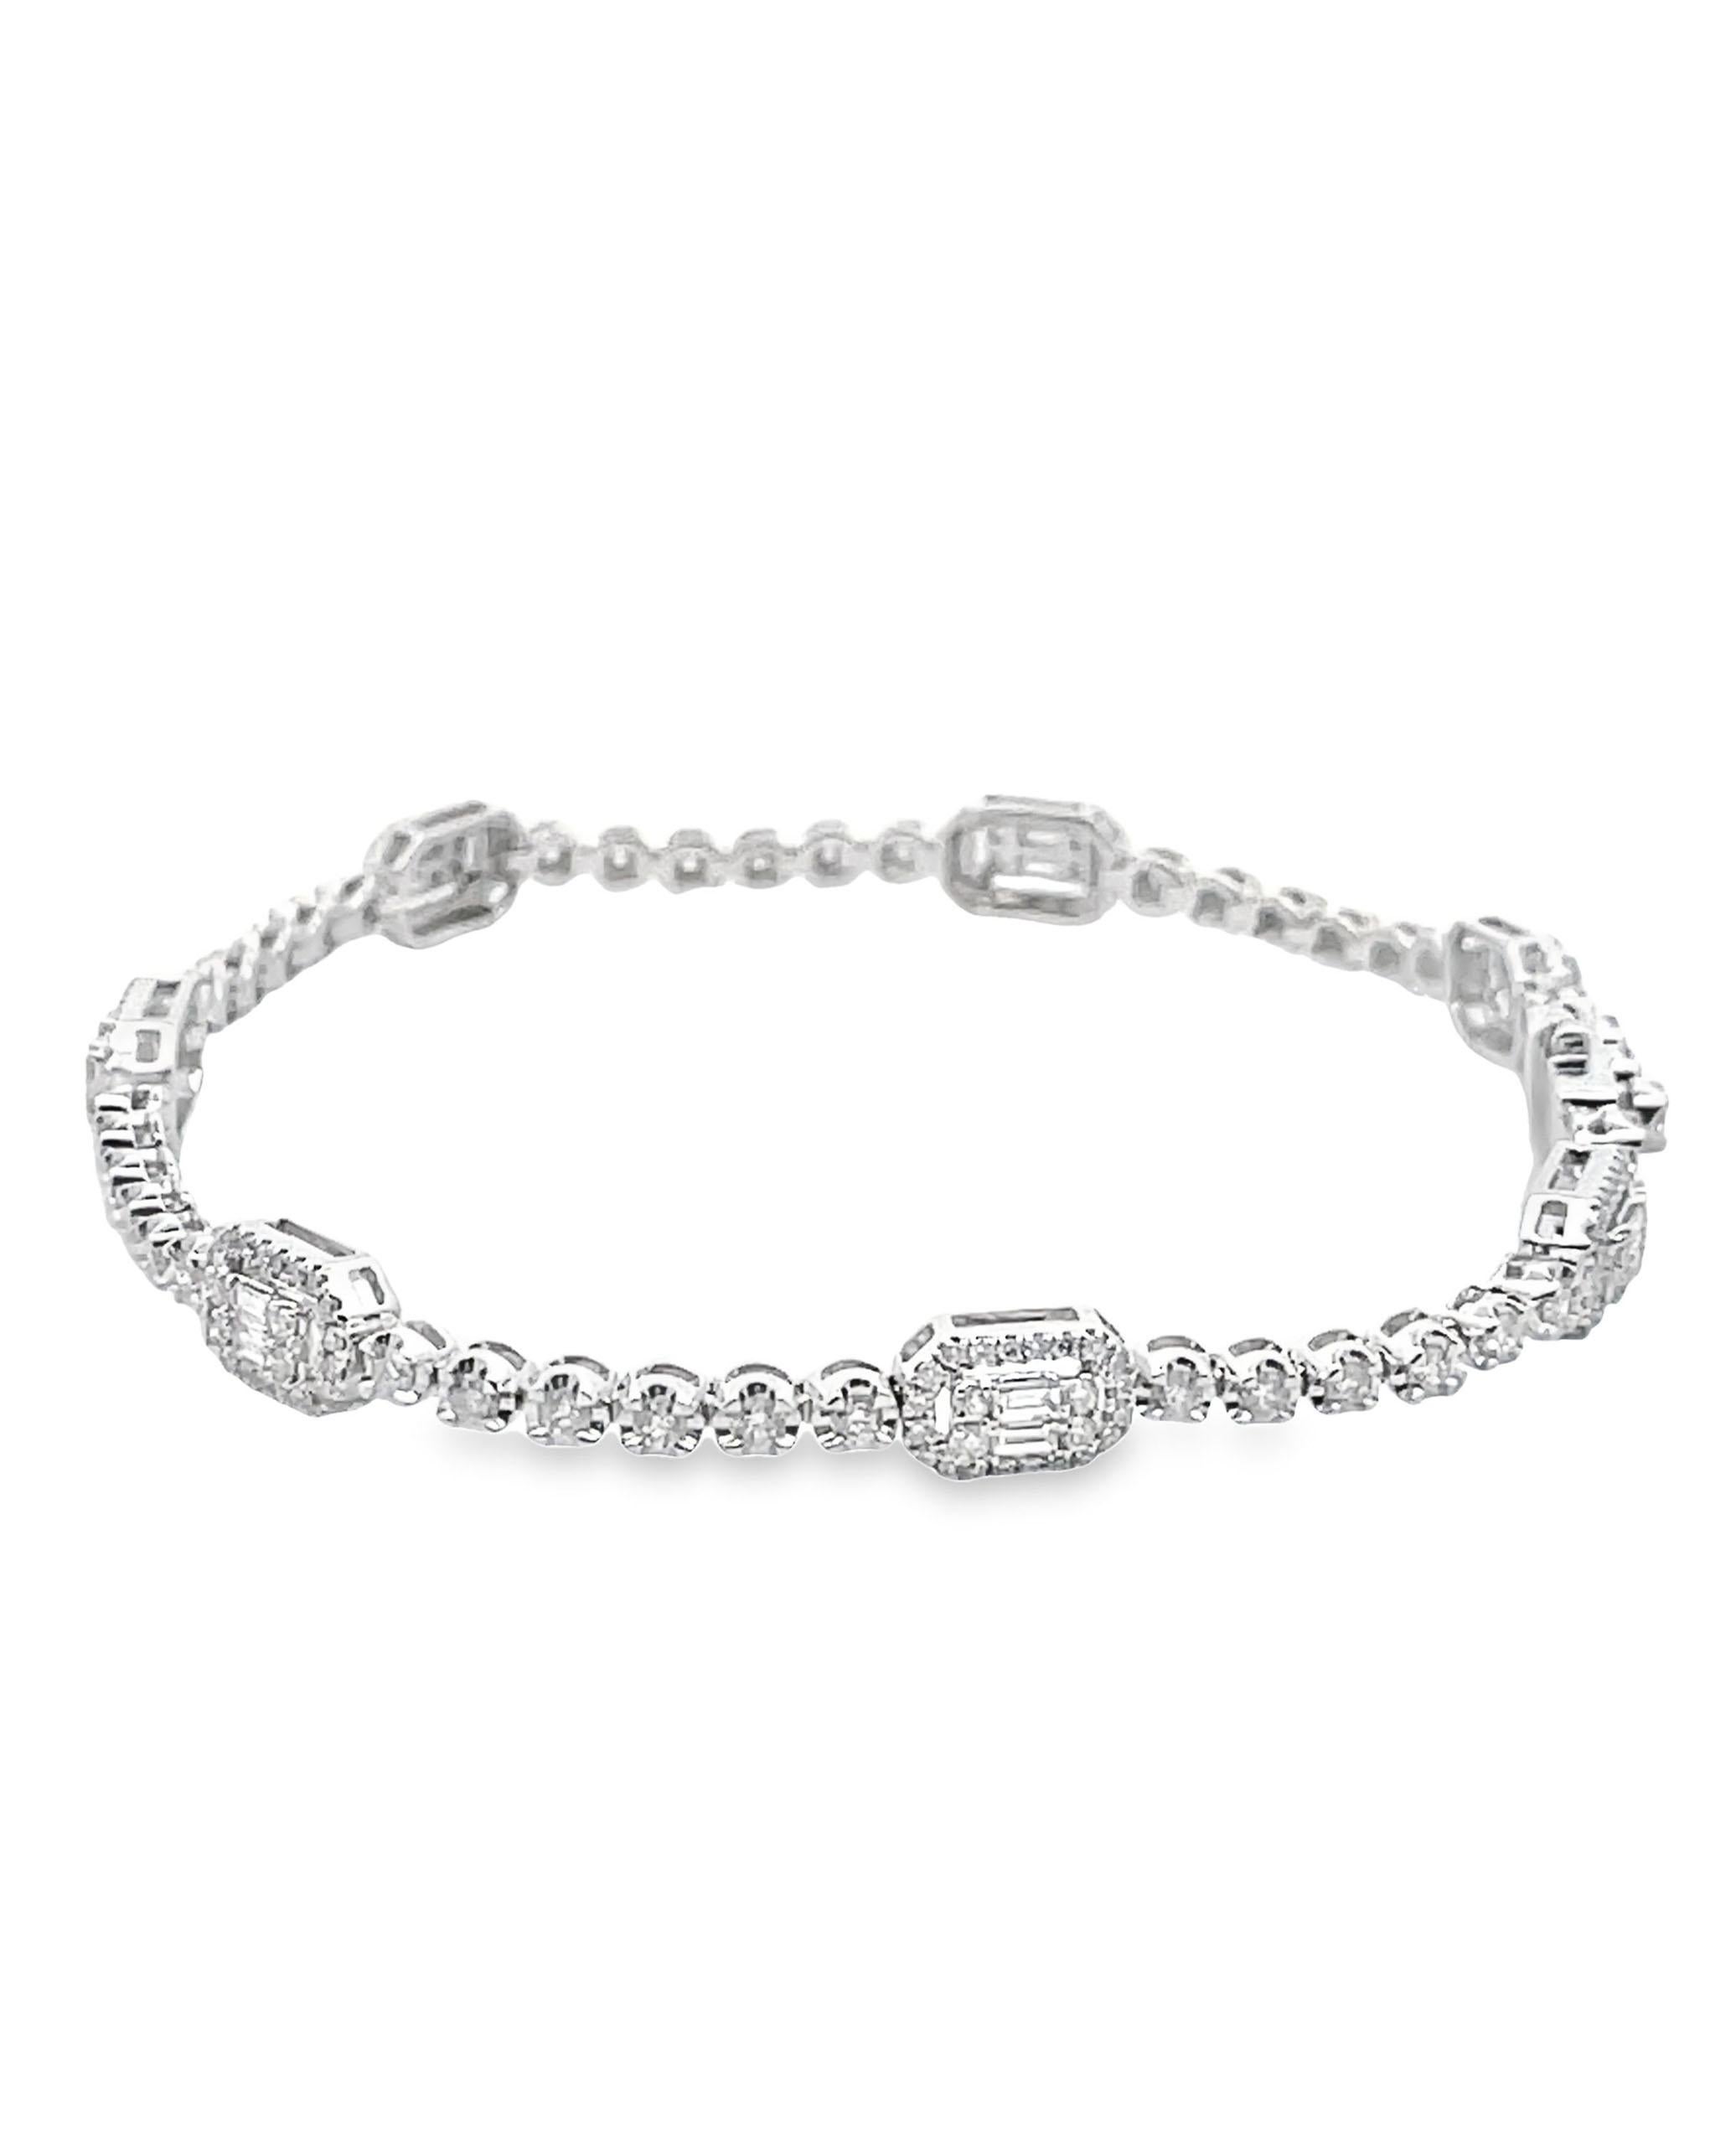 18K White Gold Tennis Bracelet with Round and Baguette Diamonds For Sale 1